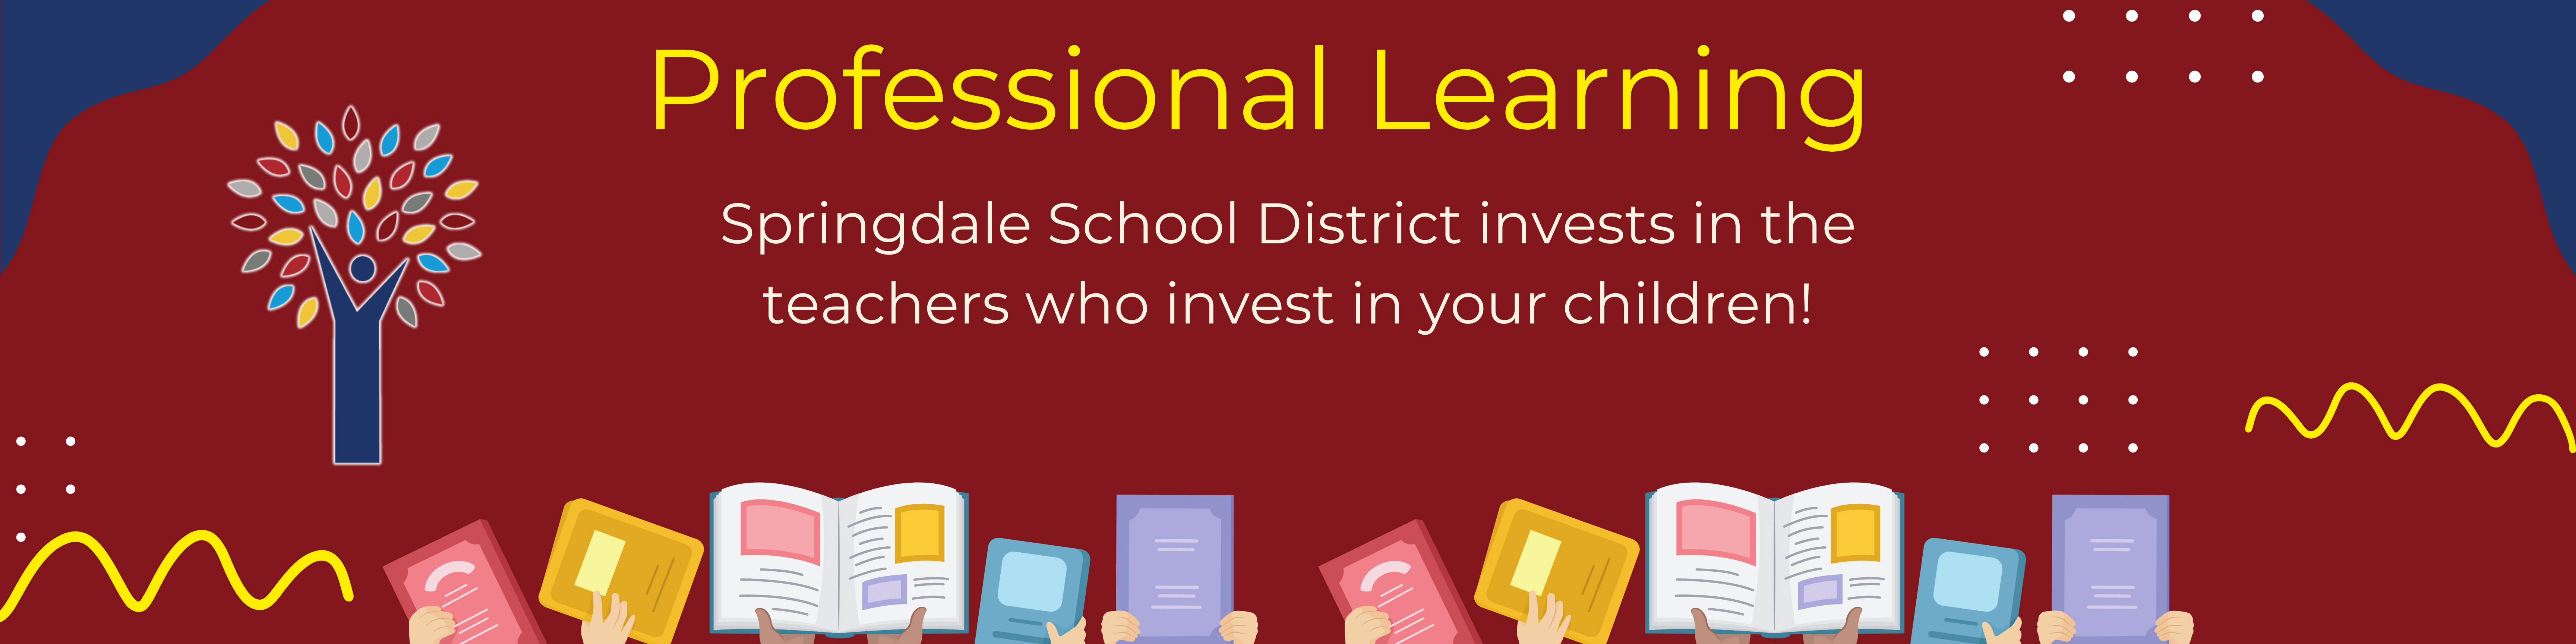 Professional Learning. Springdale School District invests in teachers who invest in your children!